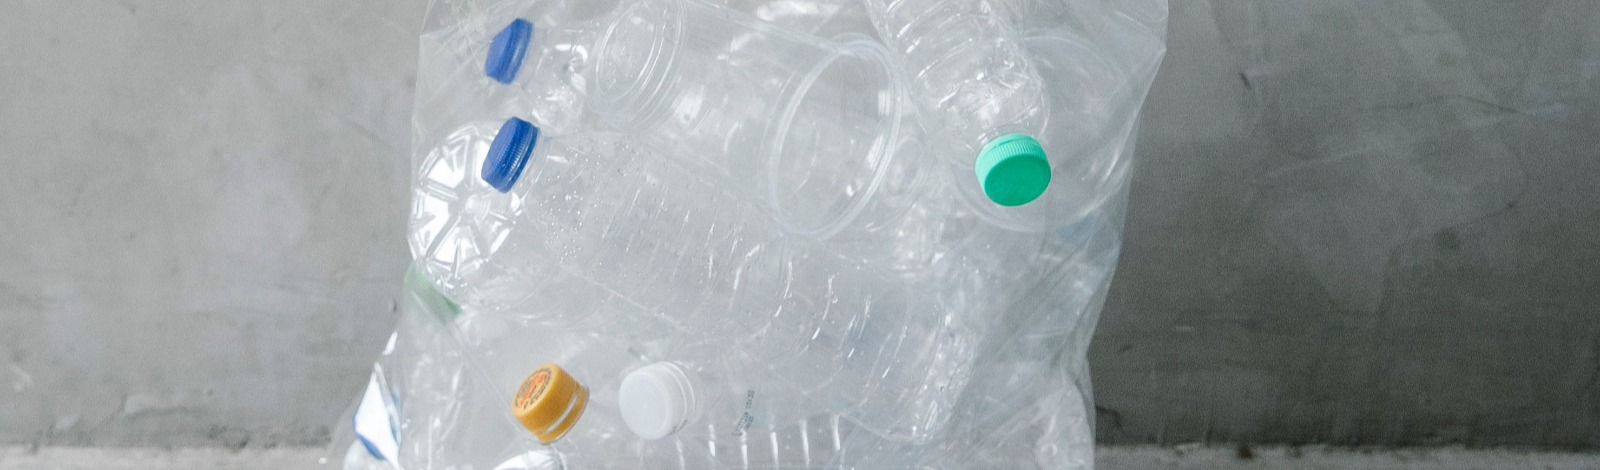 plastic bottles in a clear bag